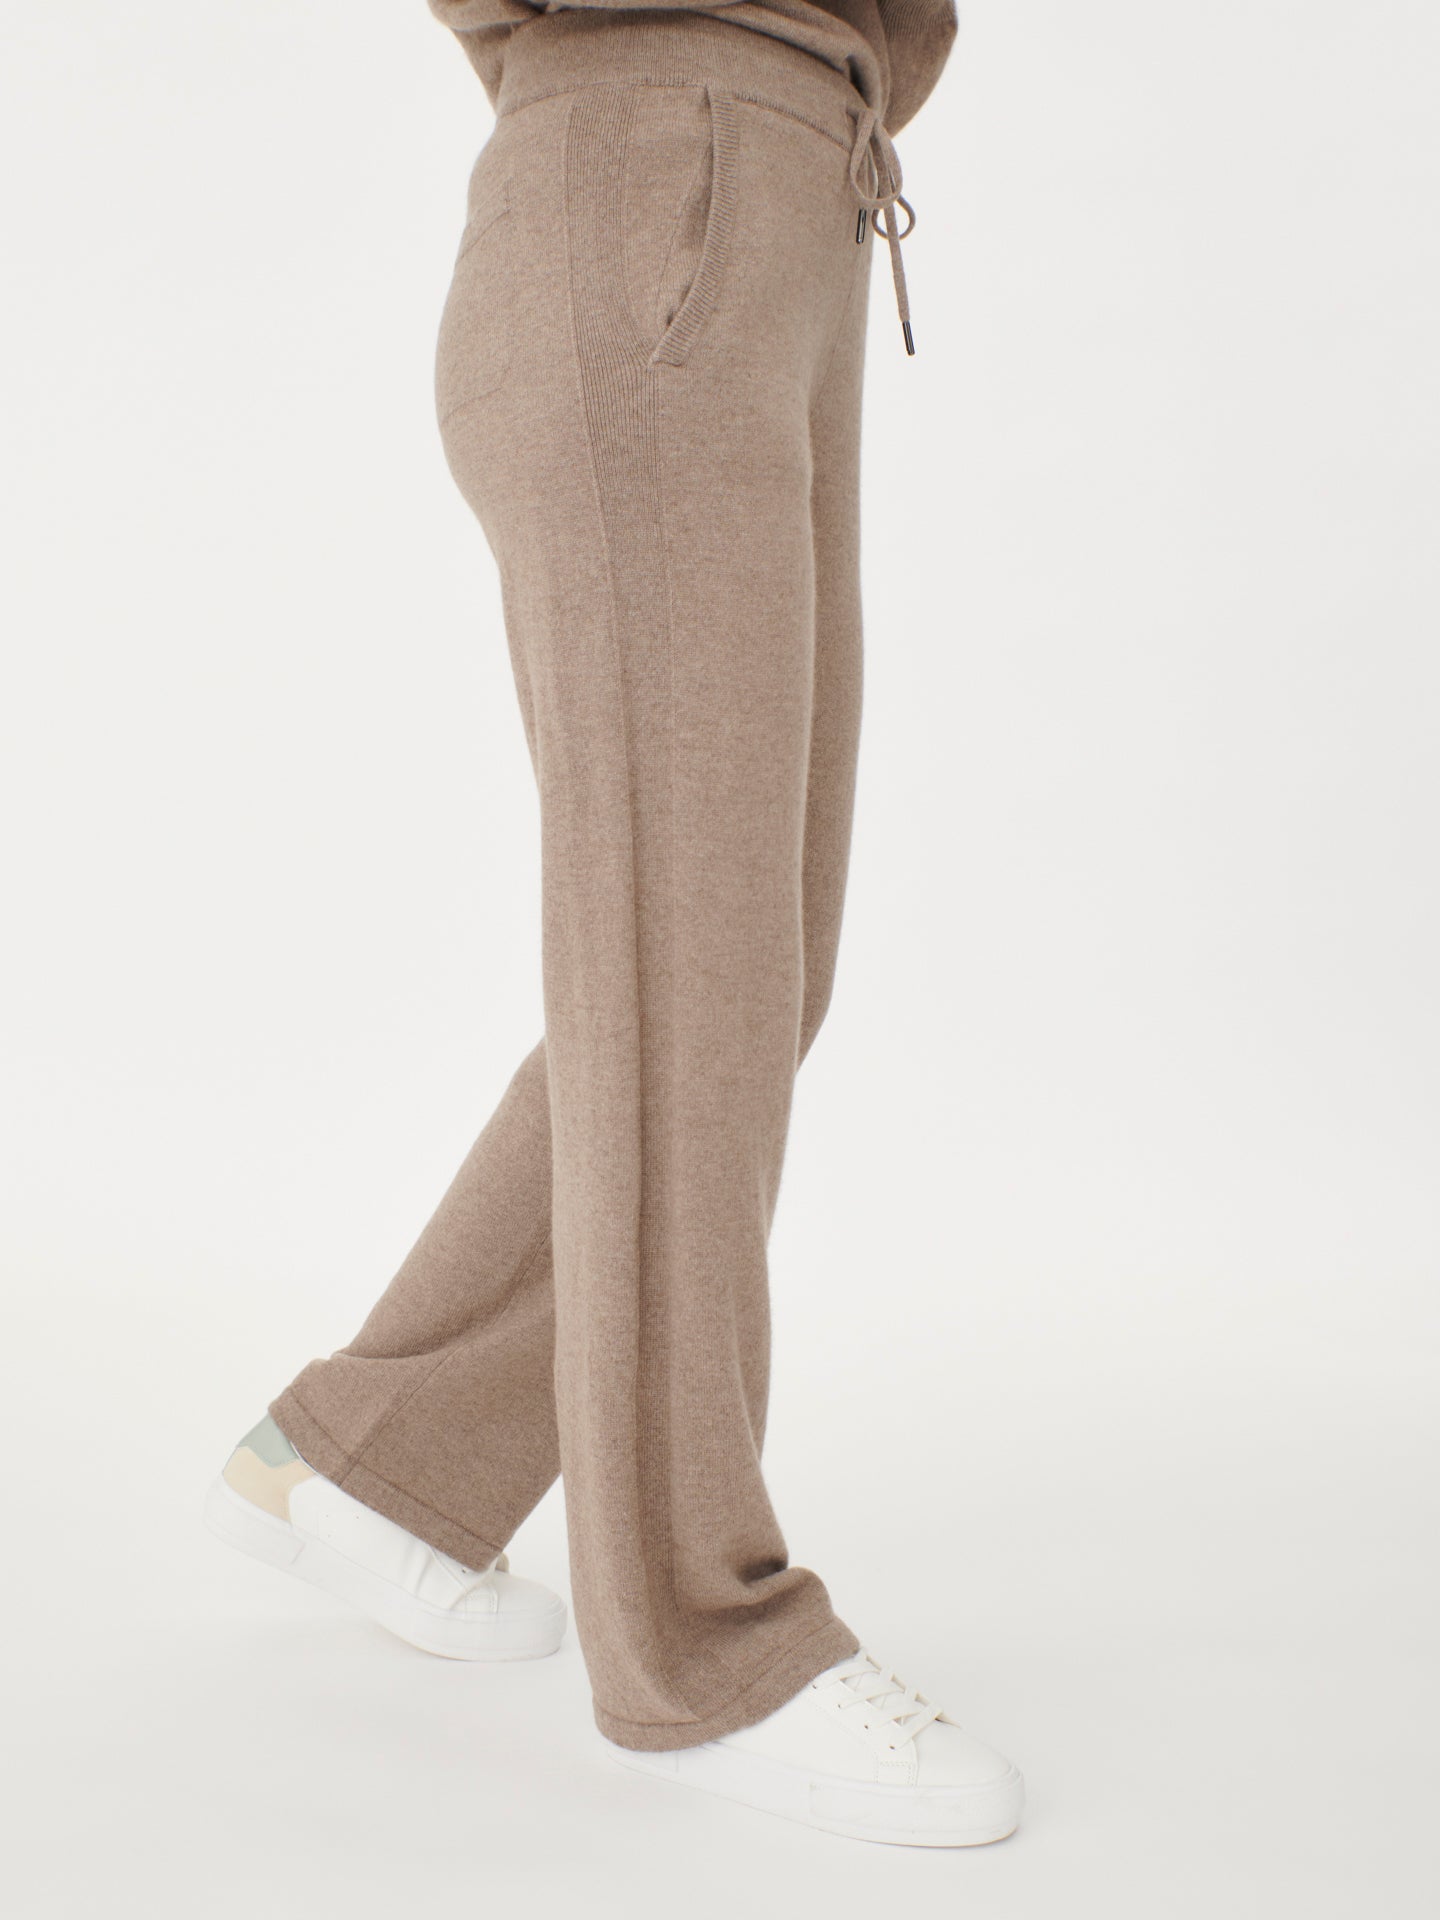 Women's Cashmere Straight Leg Jogger With Contrast Side Taupe - Gobi Cashmere